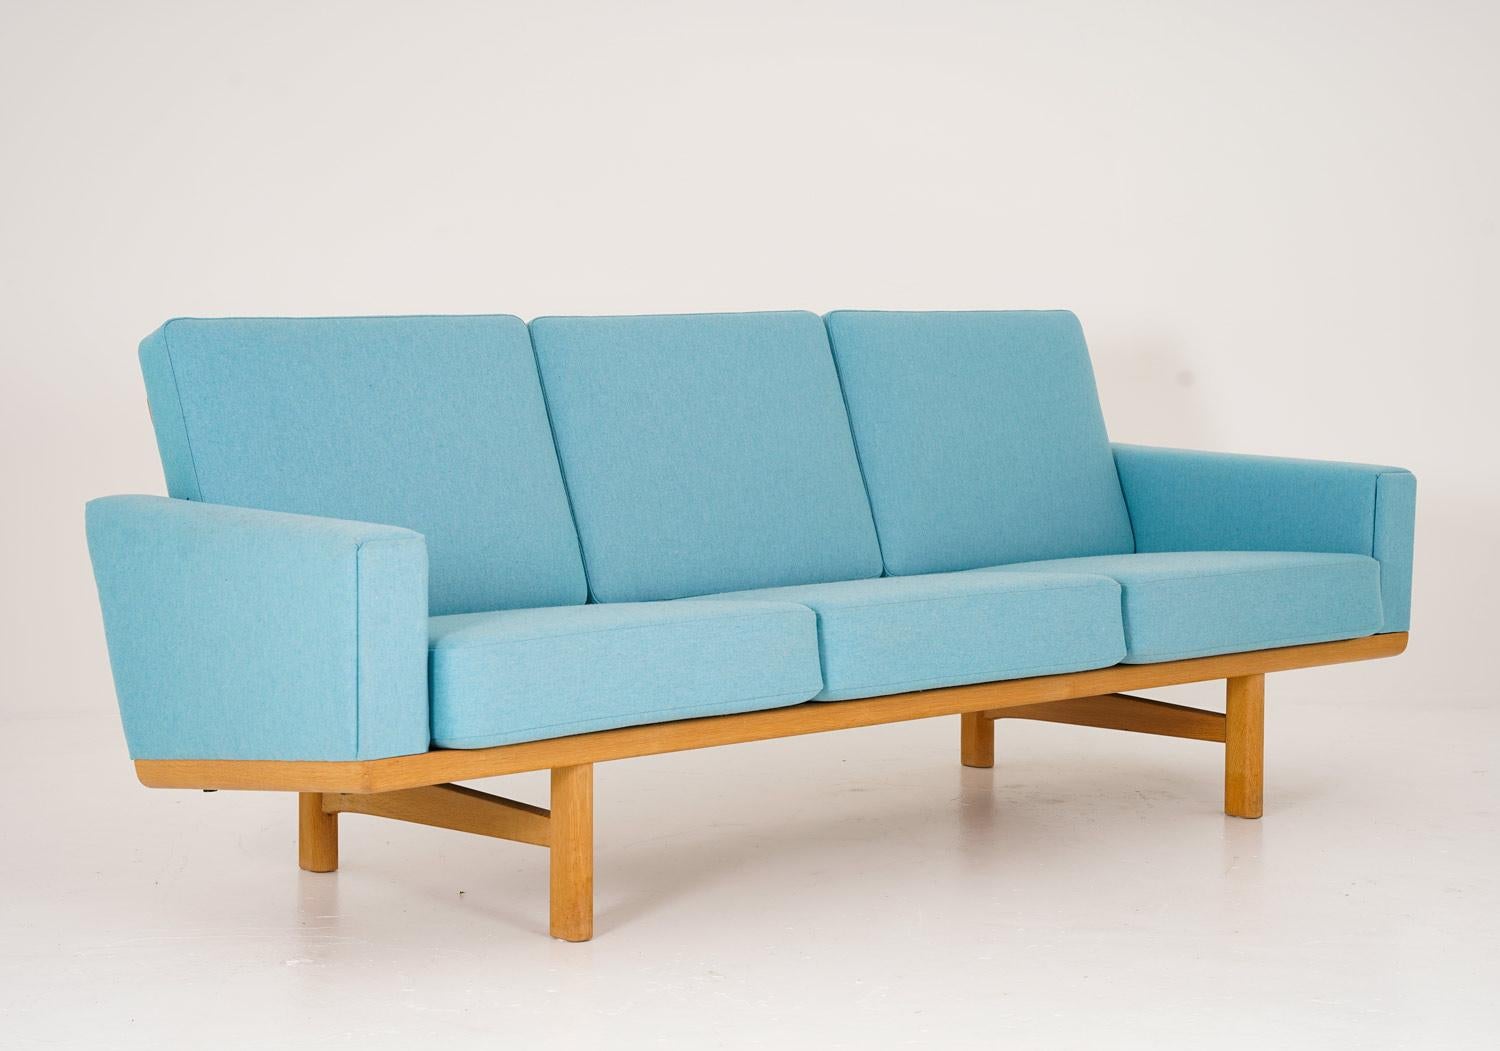 Three-seater sofa Model 236/3 by Hans J. Wegner, Denmark. 

The sofa has a frame made of oak that looks great from any angle, making it perfect as a room divider. 

Condition: The frame is in very good original condition. The cushions are